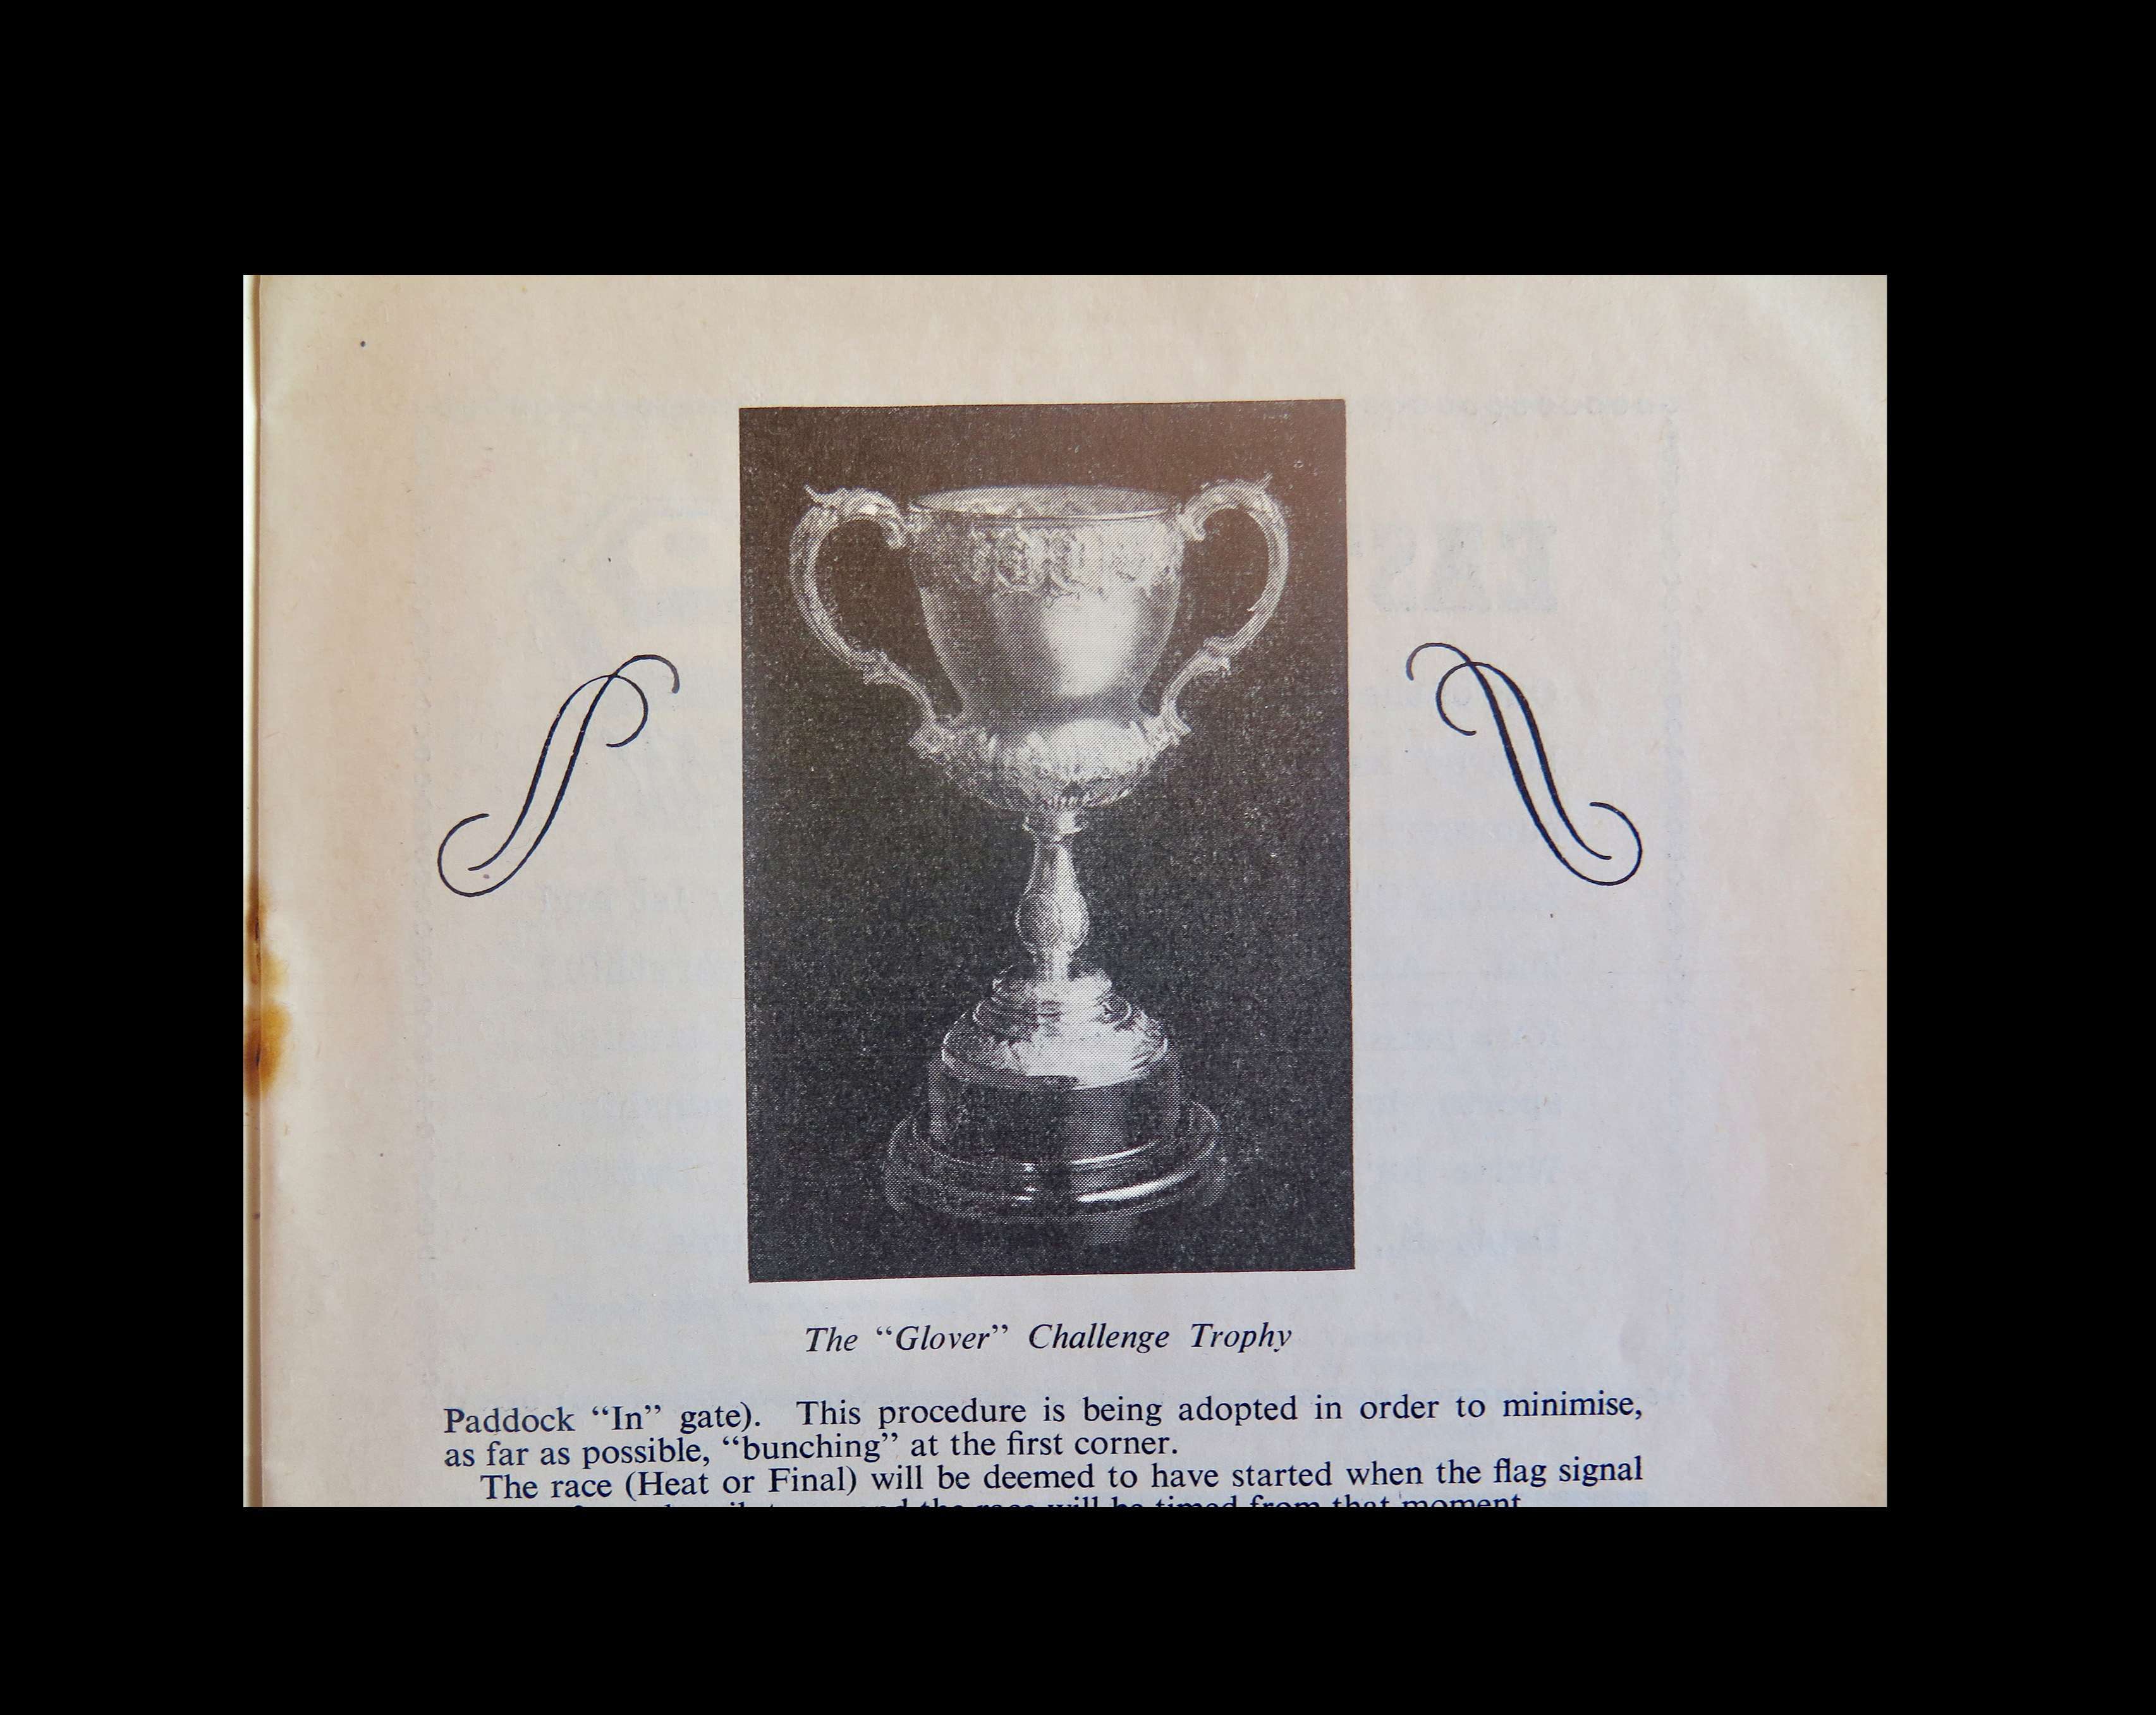 And here’s the race programme depiction of the Glover Trophy itself…